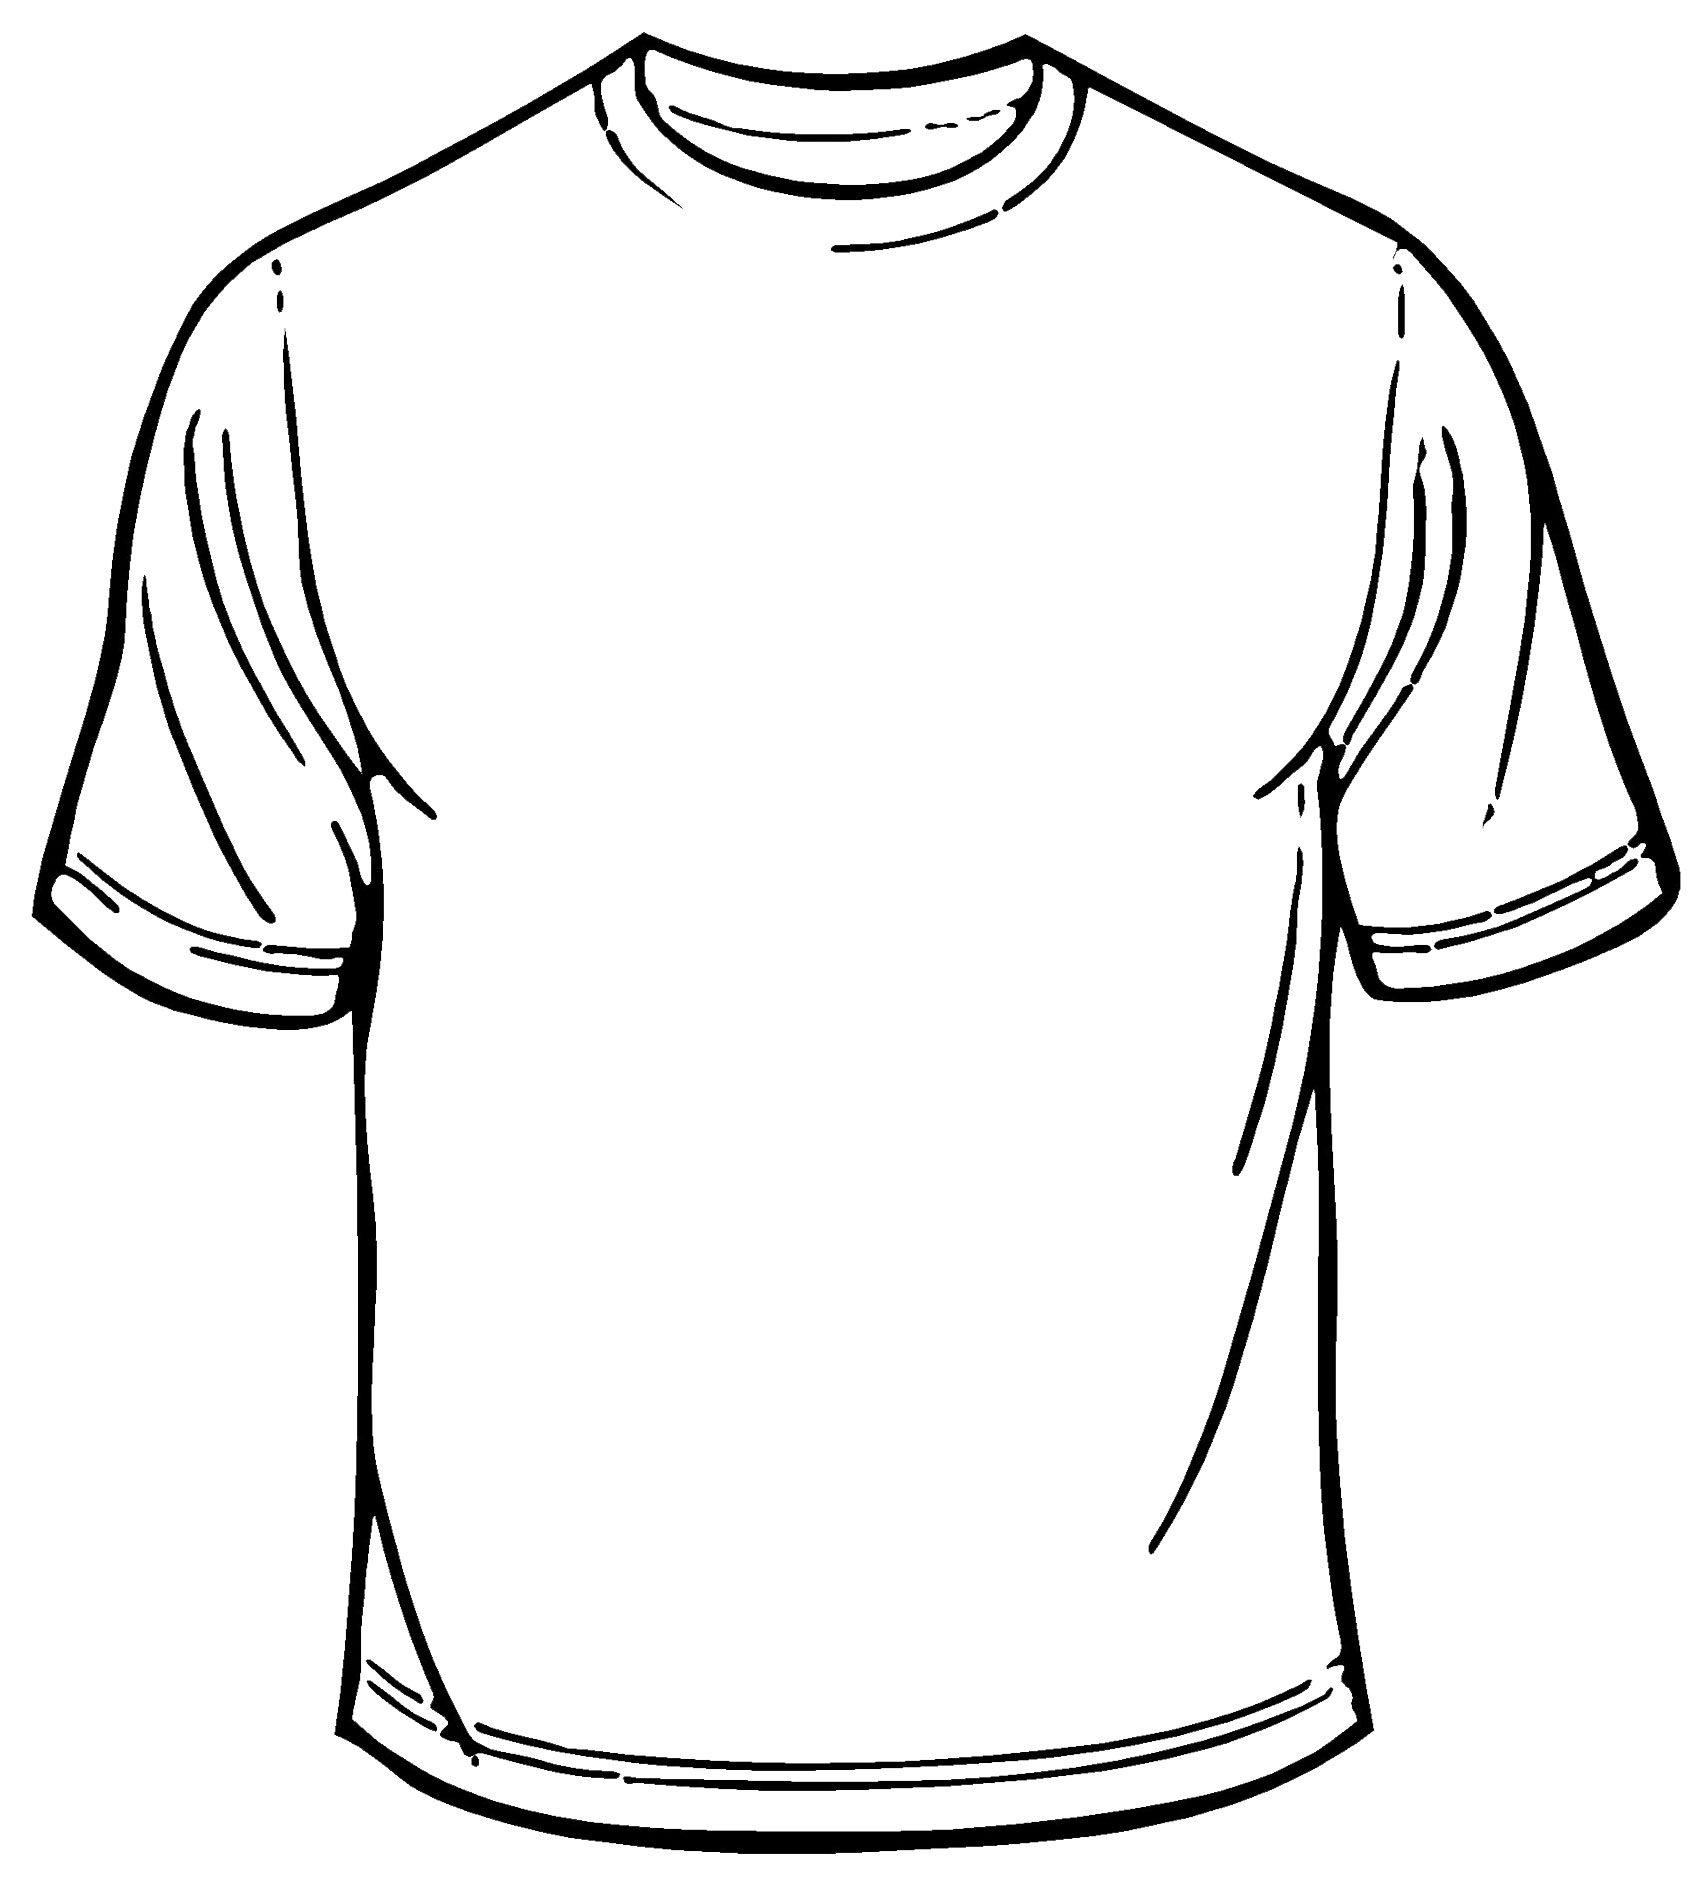 t-shirt-outline-template